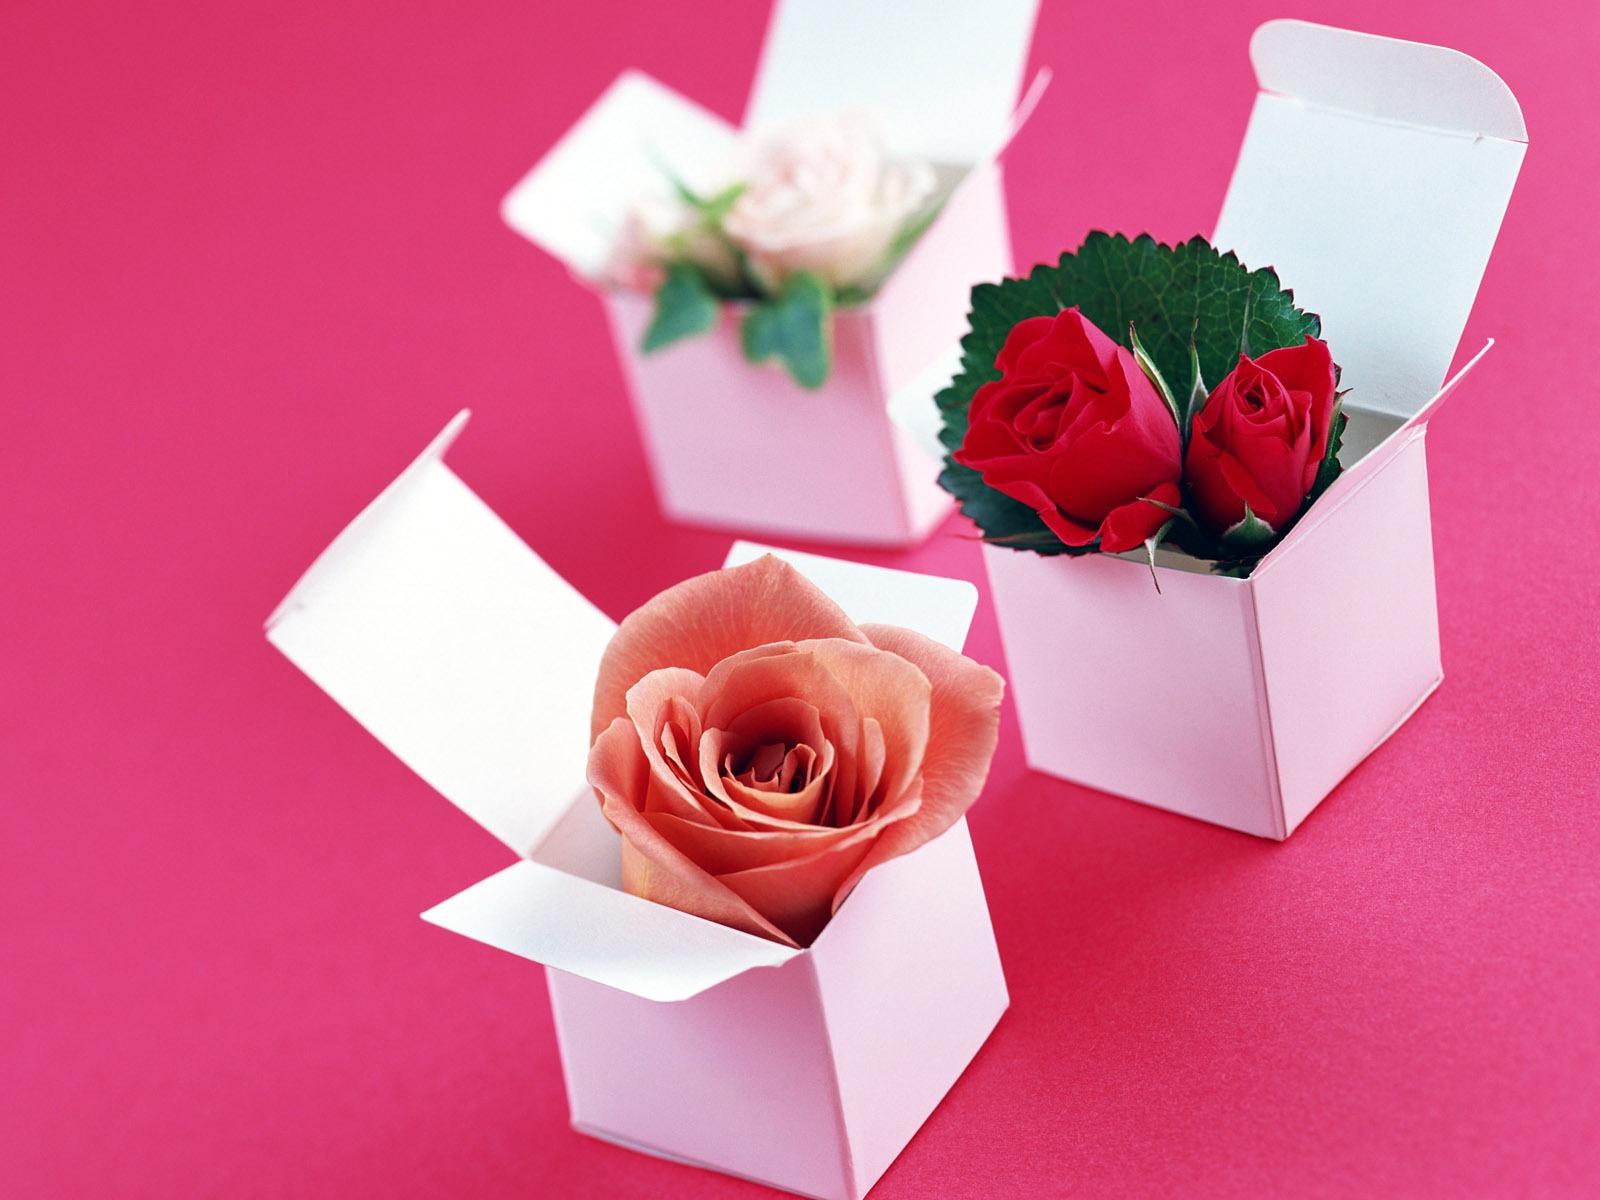 Flowers and gifts wallpaper (1) #1 - 1600x1200